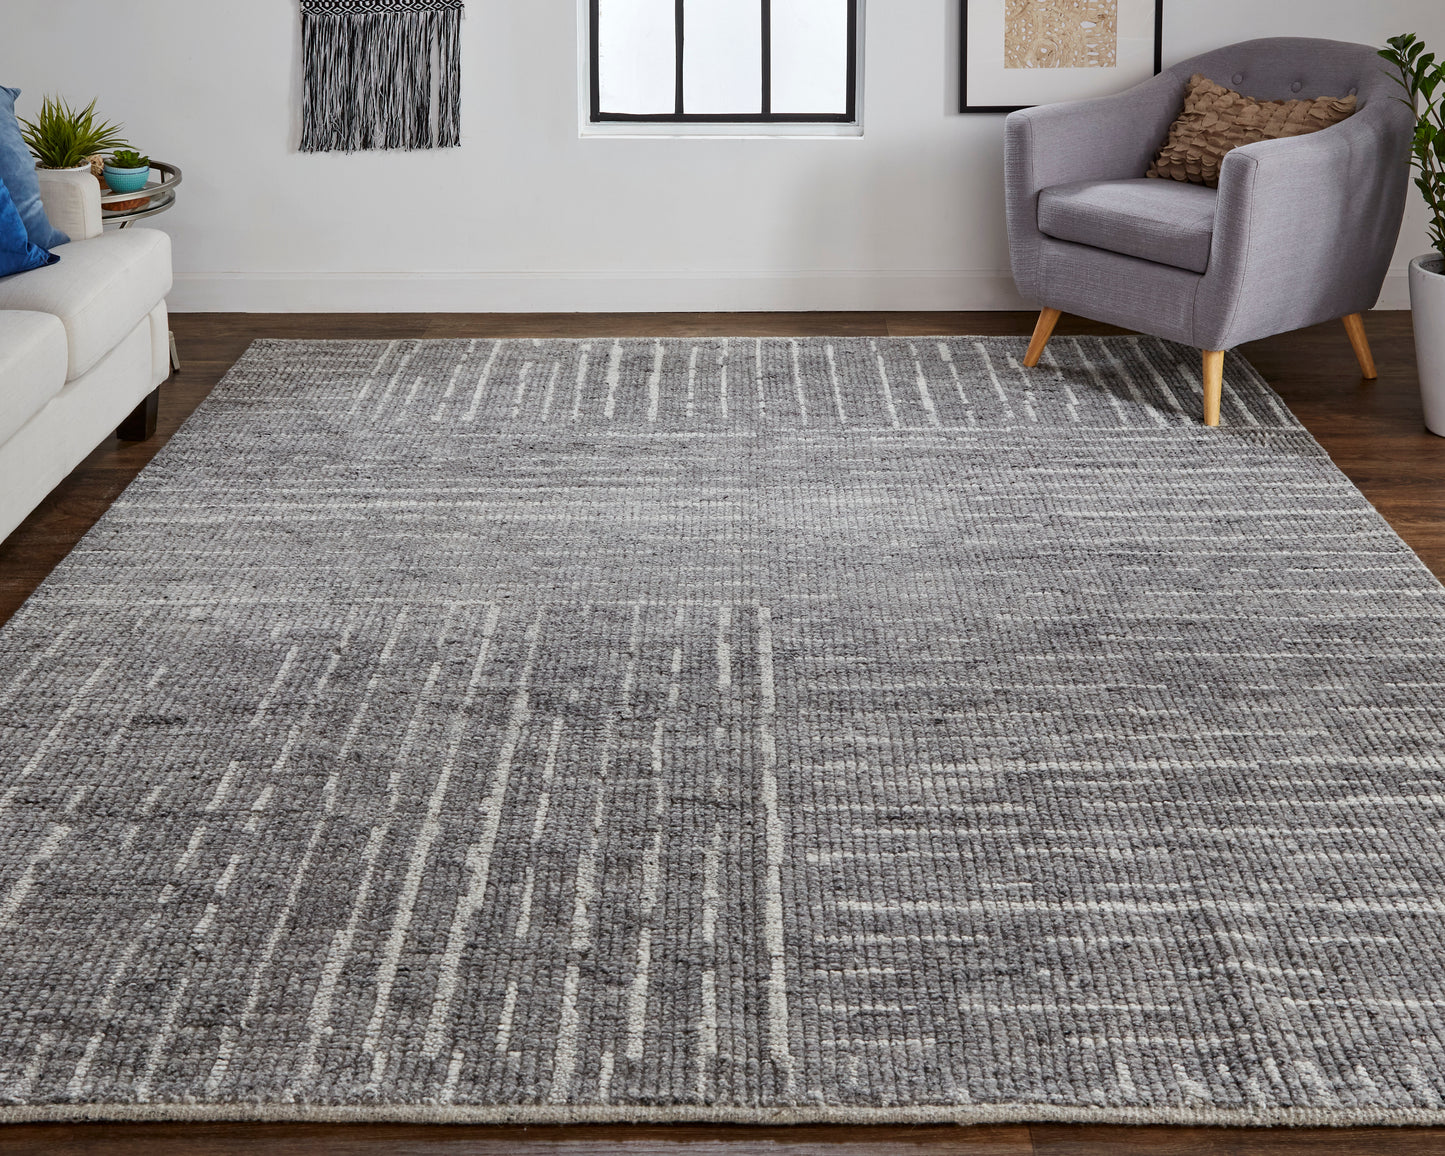 Feizy Alford 6913F Charcoal Modern/Mid-Century Modern/Indu Hand Knotted Rug